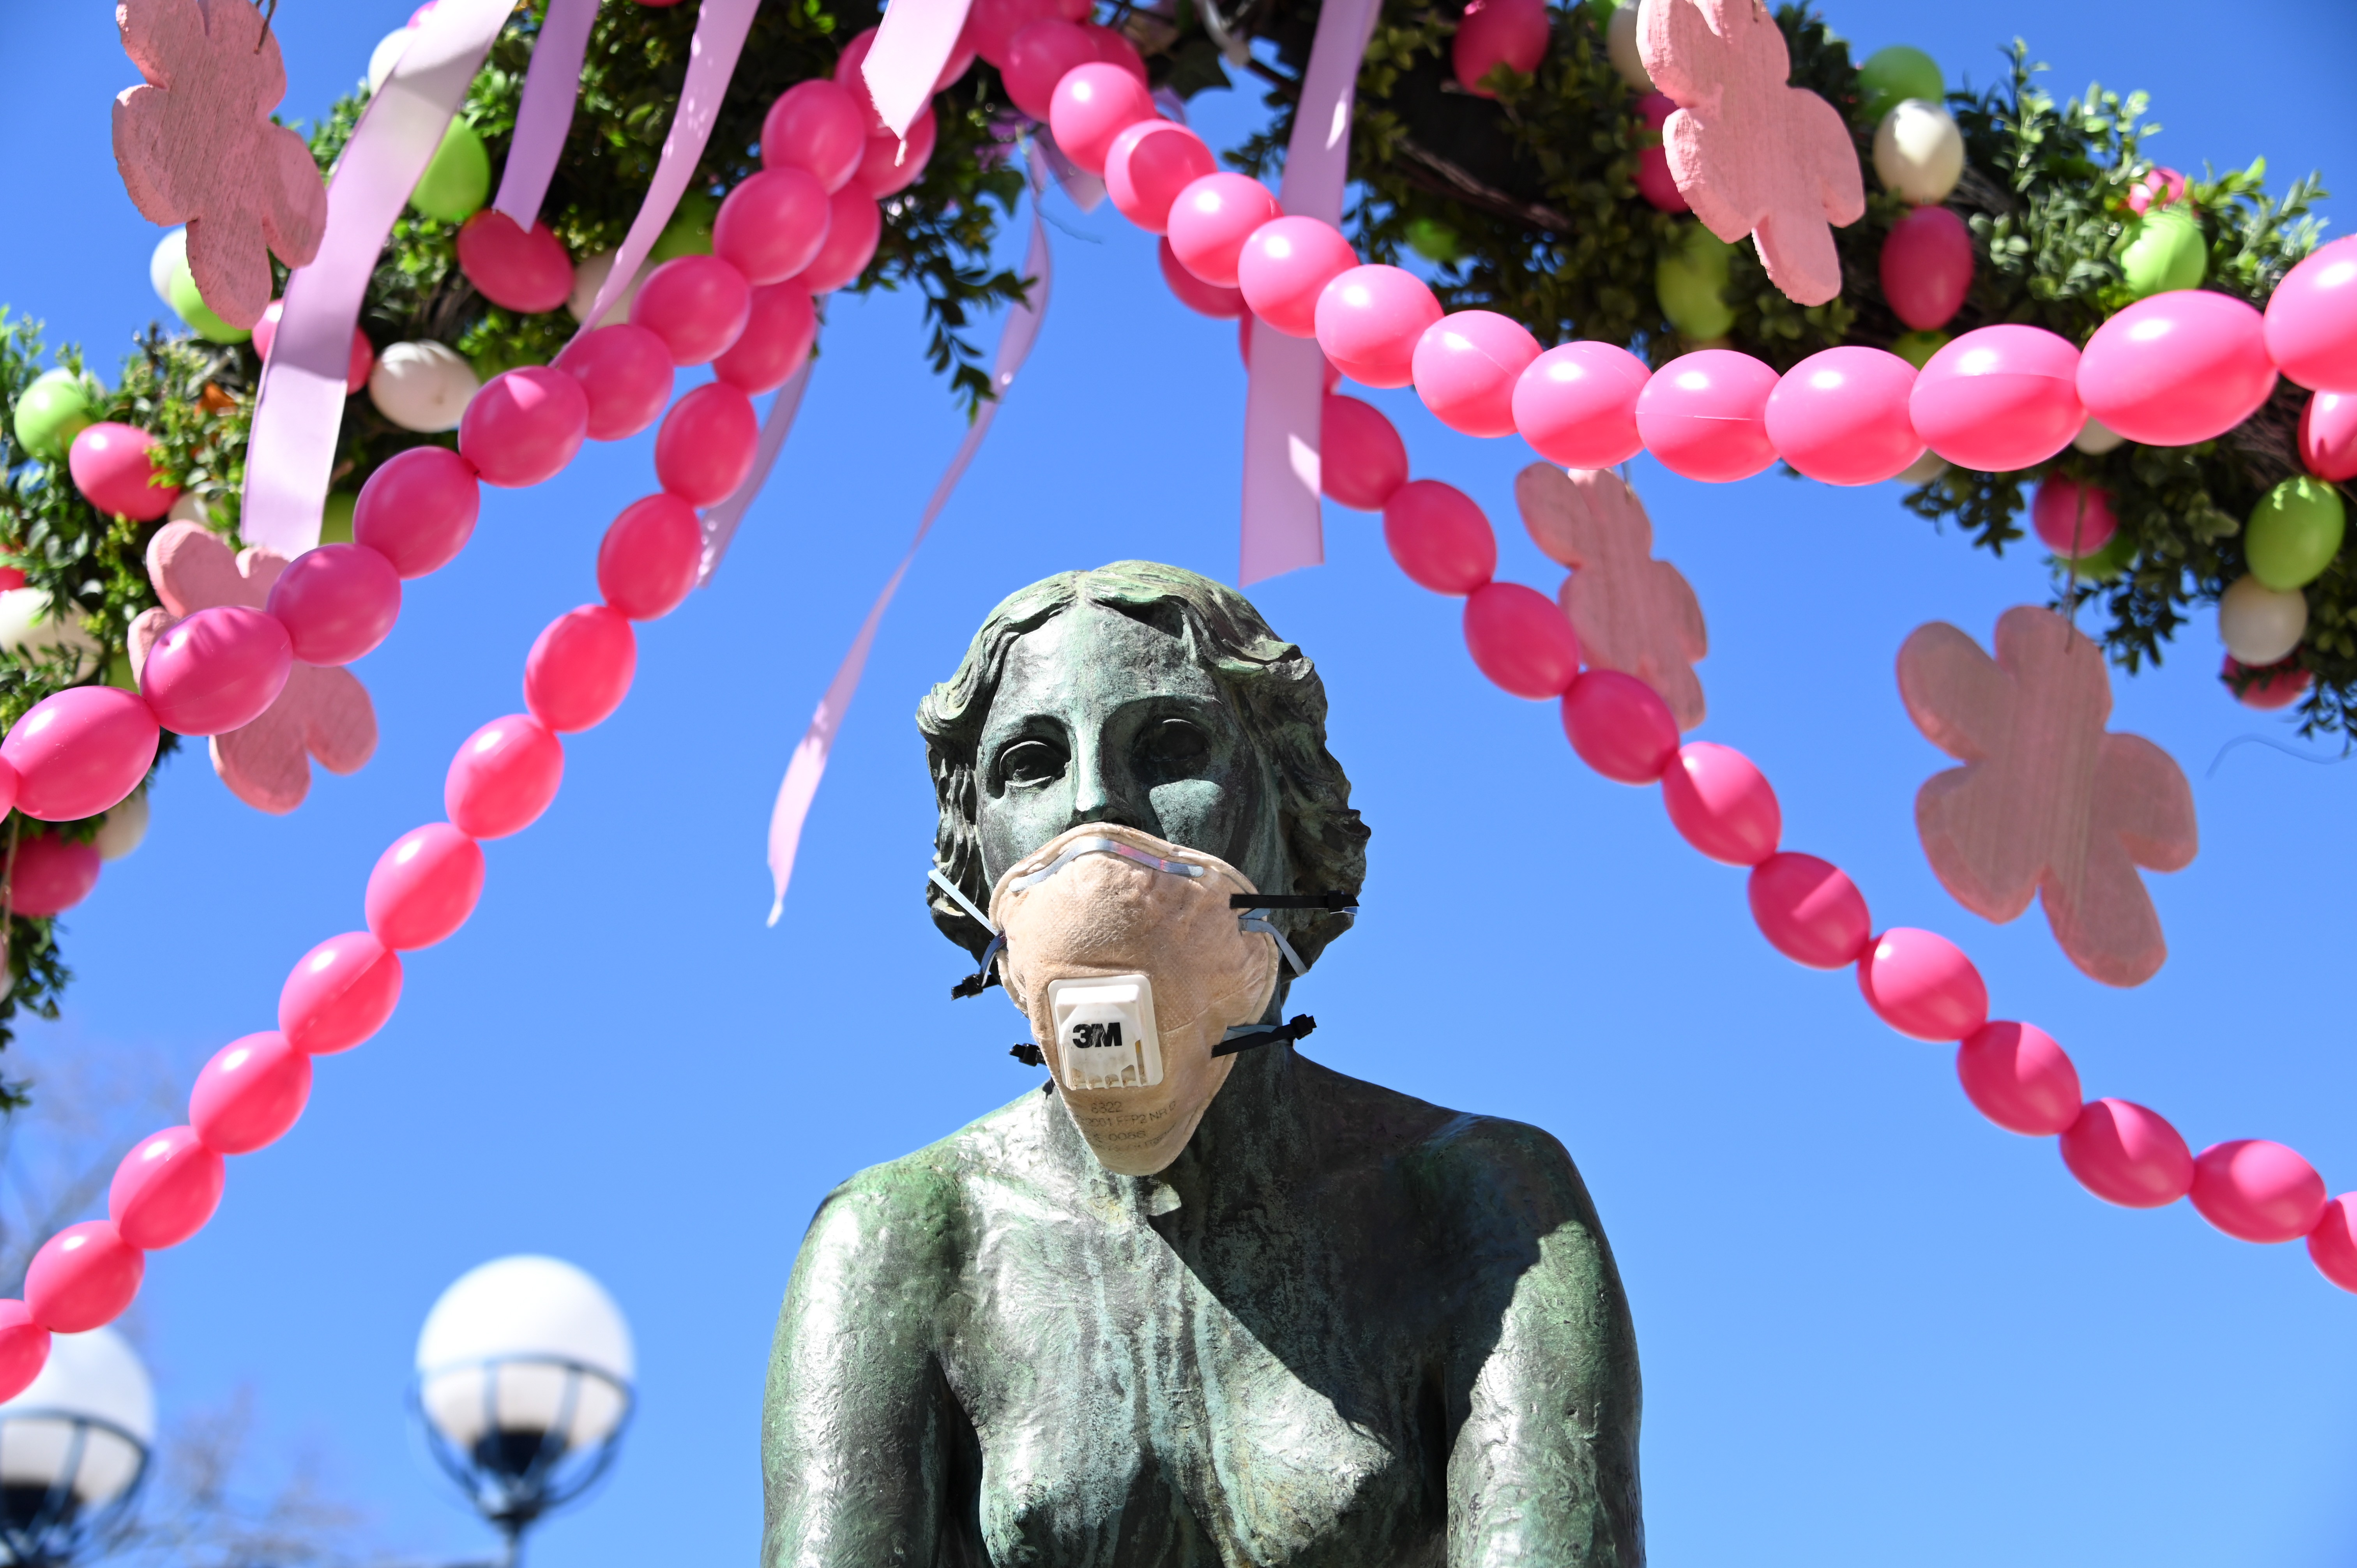 A face mask placed on The Nymph fountain in Bad Wildungen. Germany has introduced drastic restrictions on public life and strict travel bans as part of efforts to curb the spread of the coronavirus. Photo: DPA